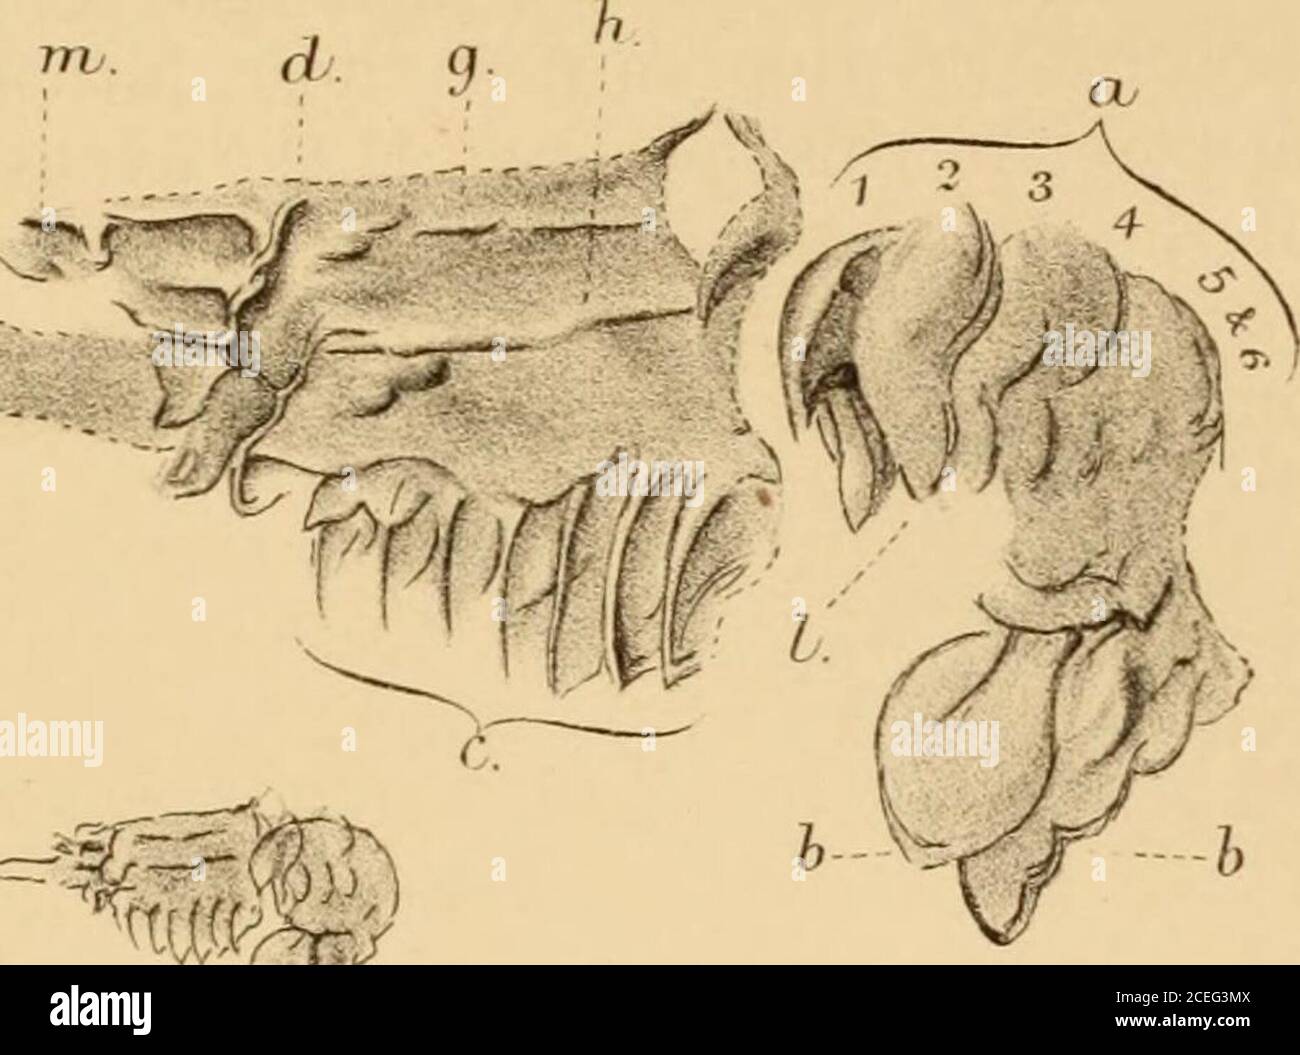 . The Quarterly journal of the Geological Society of London. e. Middle of cervical groove. /. Lateral angles (posterior) of carapace. g. Median ridge of carapace. h. Lateral ridges. i. „ margin of carapace. 7c. Indication of appendage. /. Pleurae of abdominal somites. m. Portion of rostrum. (N.B. The letters refer to the same parts in all the figures.)* Sheet 41, Scotland. t Trans. Roy. Soc. Edinb. vol. xxii. p. 391. 878 e. etueridge, jun., on a lower-carboniferous decapod. Discussion. Mr. H. Woodward expressed his gratification at the discovery ofthis interesting Crustacean by Mr. Ethcridge, Stock Photo